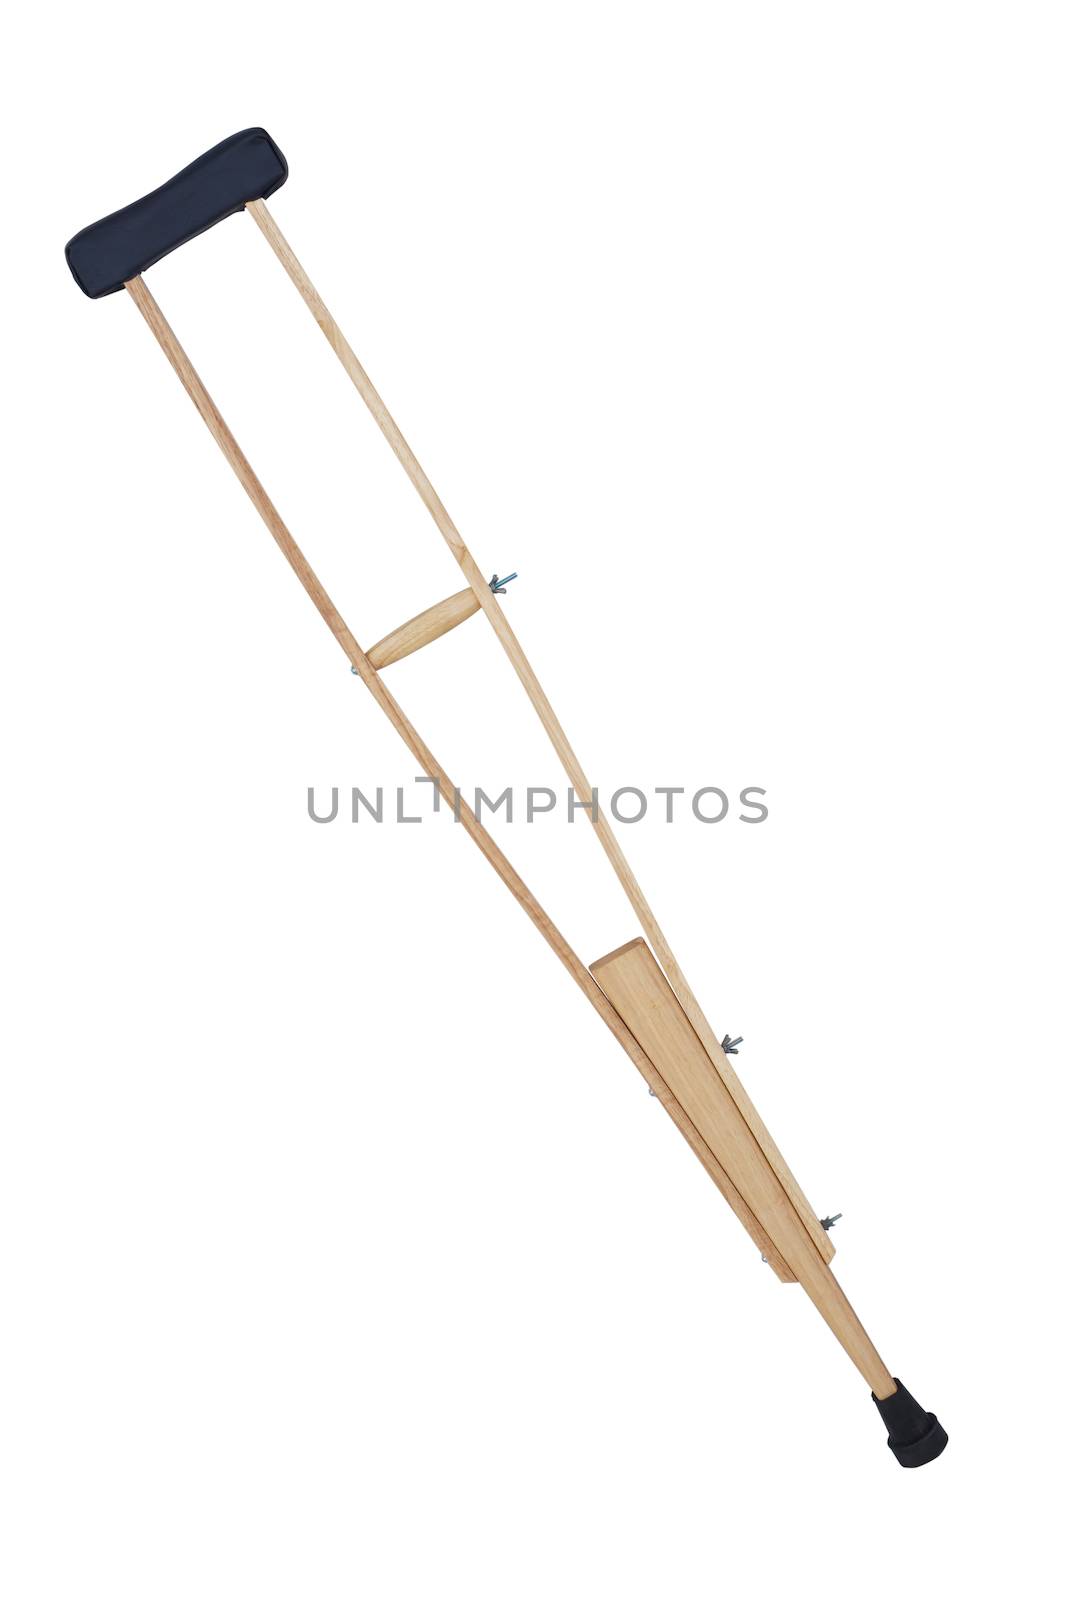 Crutch isolated on white background